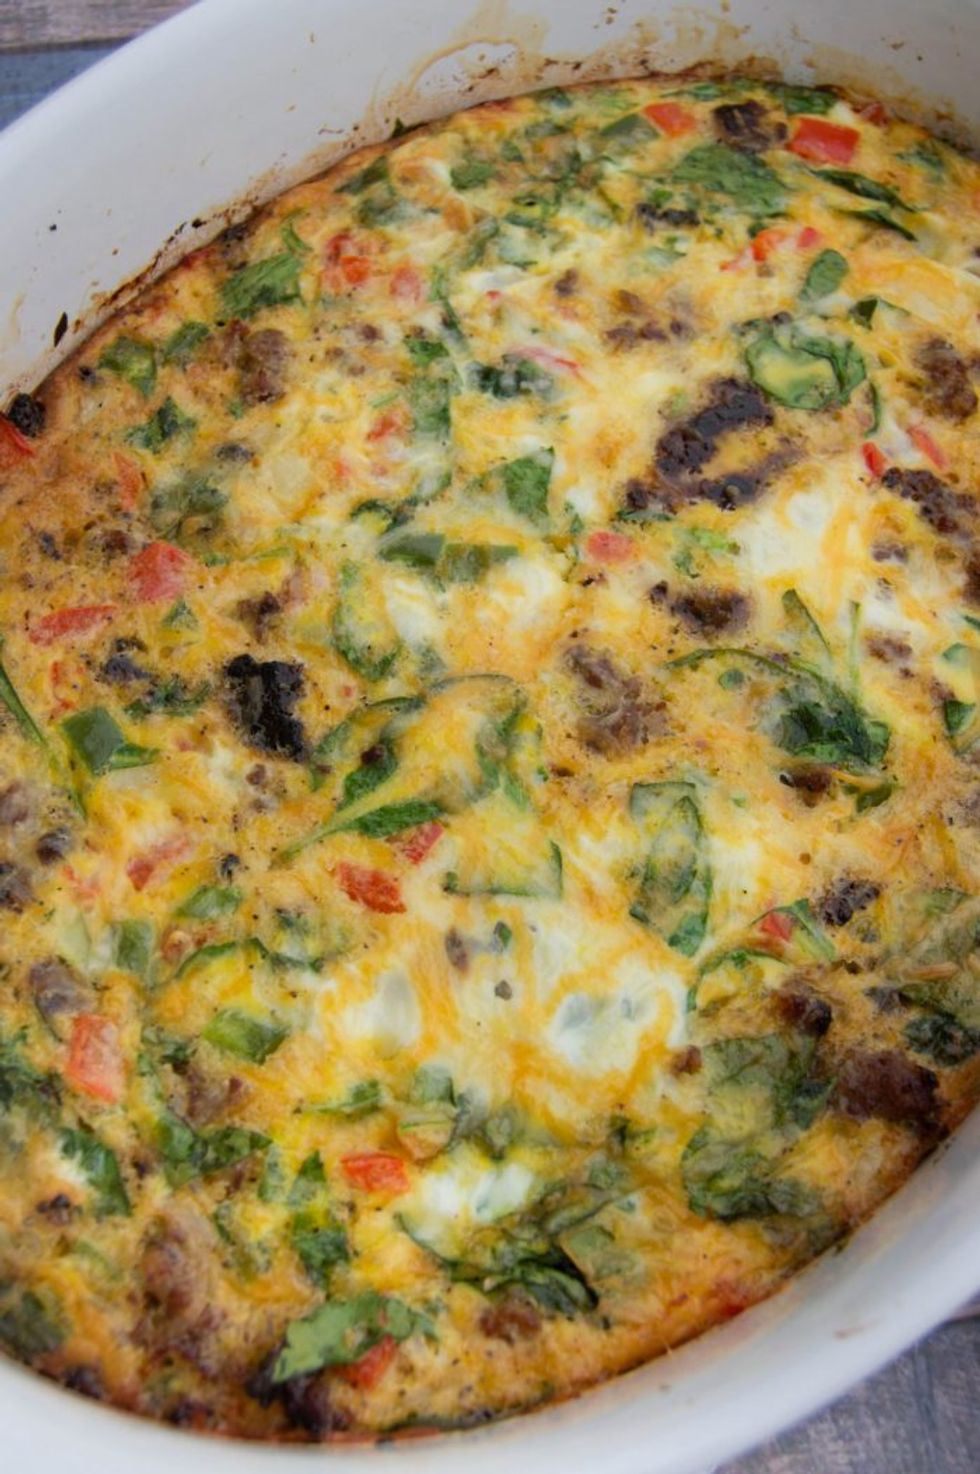 The Best Low Carb Breakfast Casserole Recipes – Easy Recipes To Make at ...